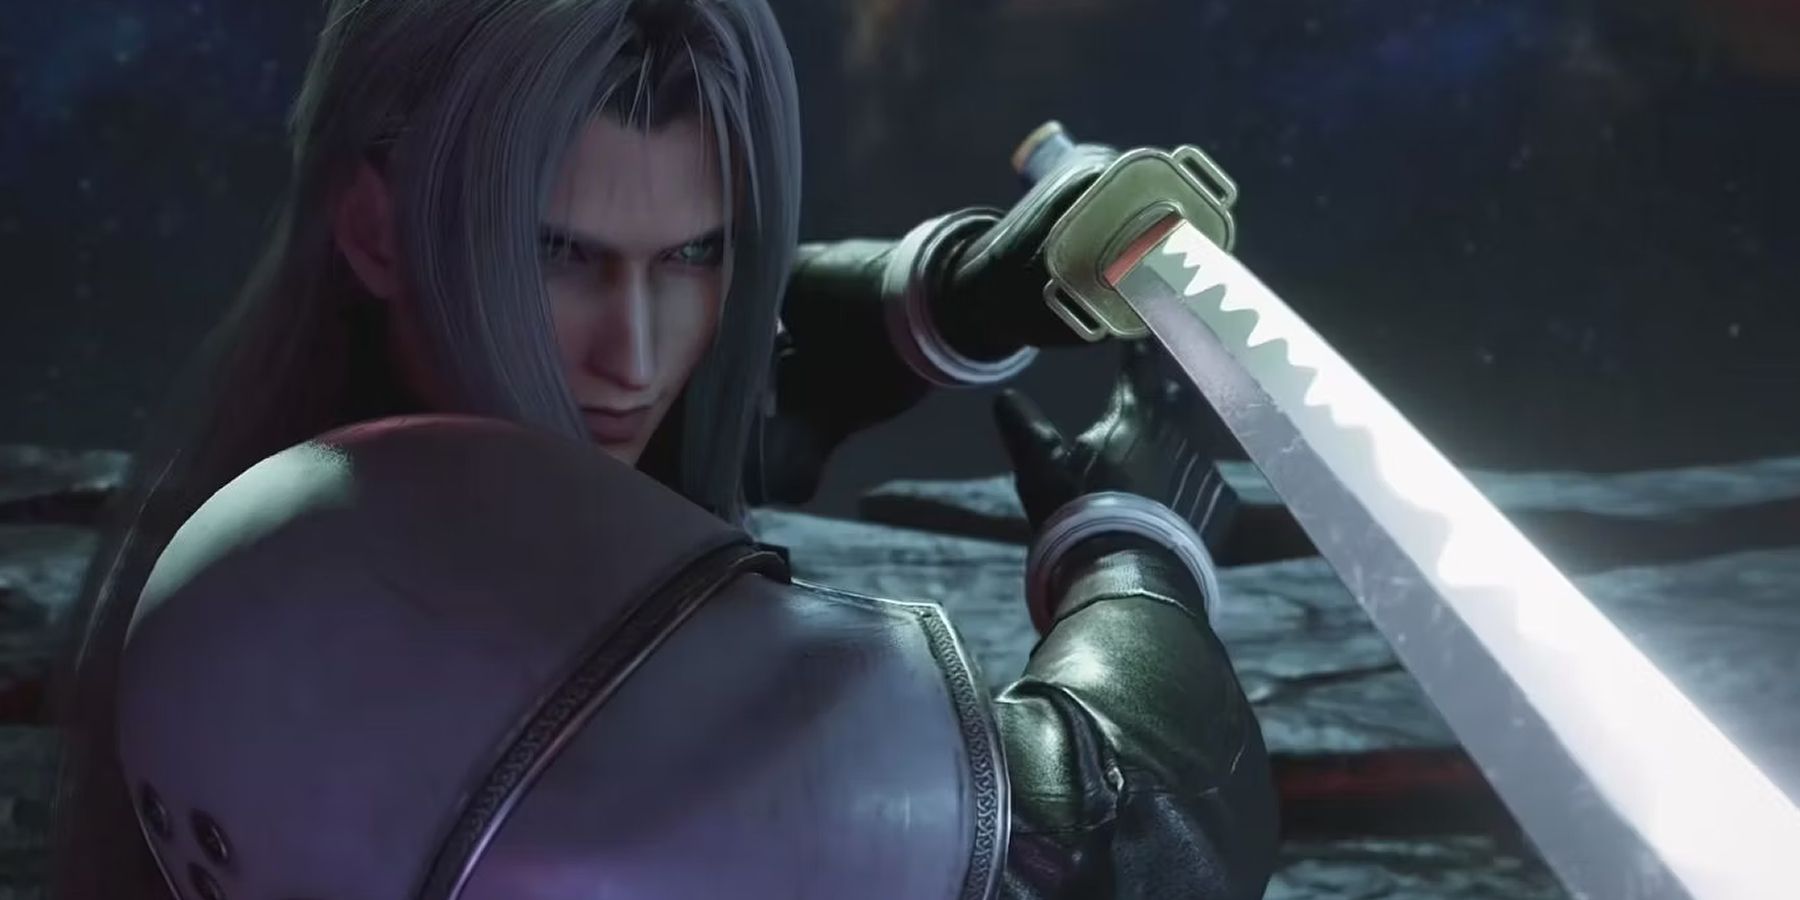 sephiroth-final-fantasy-7-remake-ready-to-fight-masamune